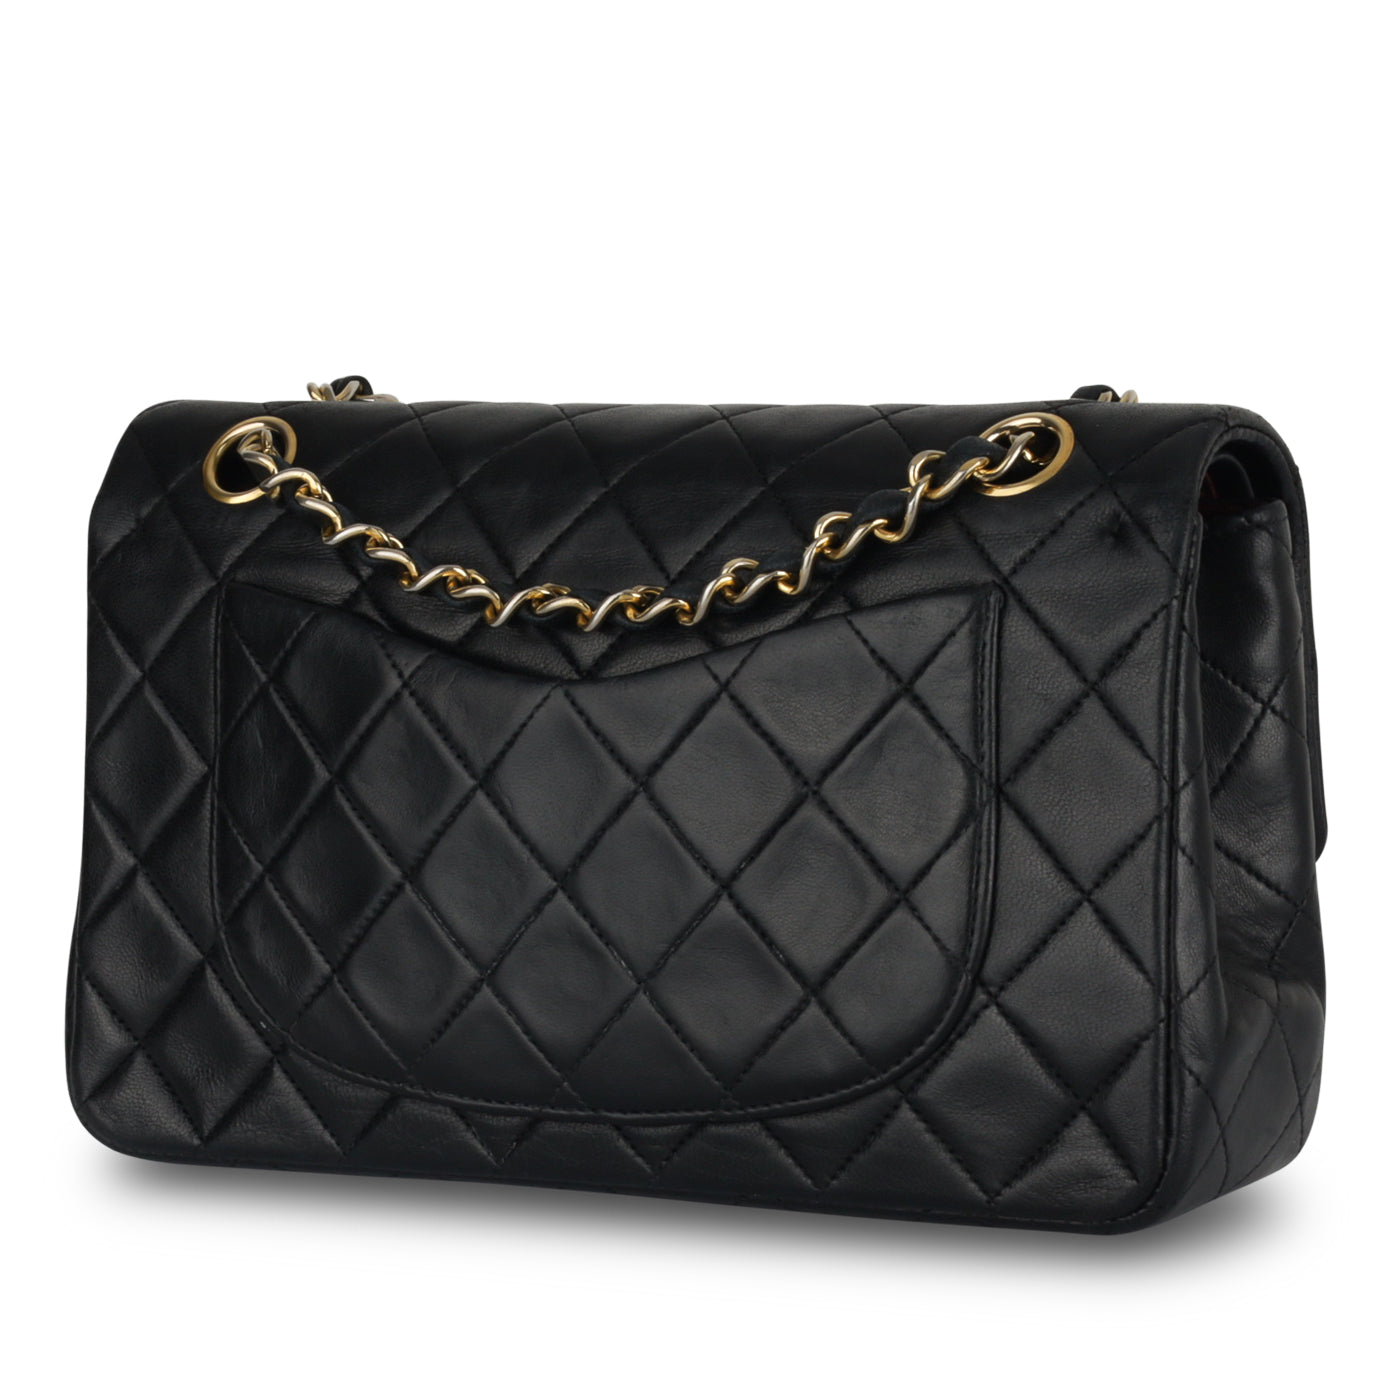 Chanel - Vintage Classic Flap Bag - Small - Black Lambskin - GHW